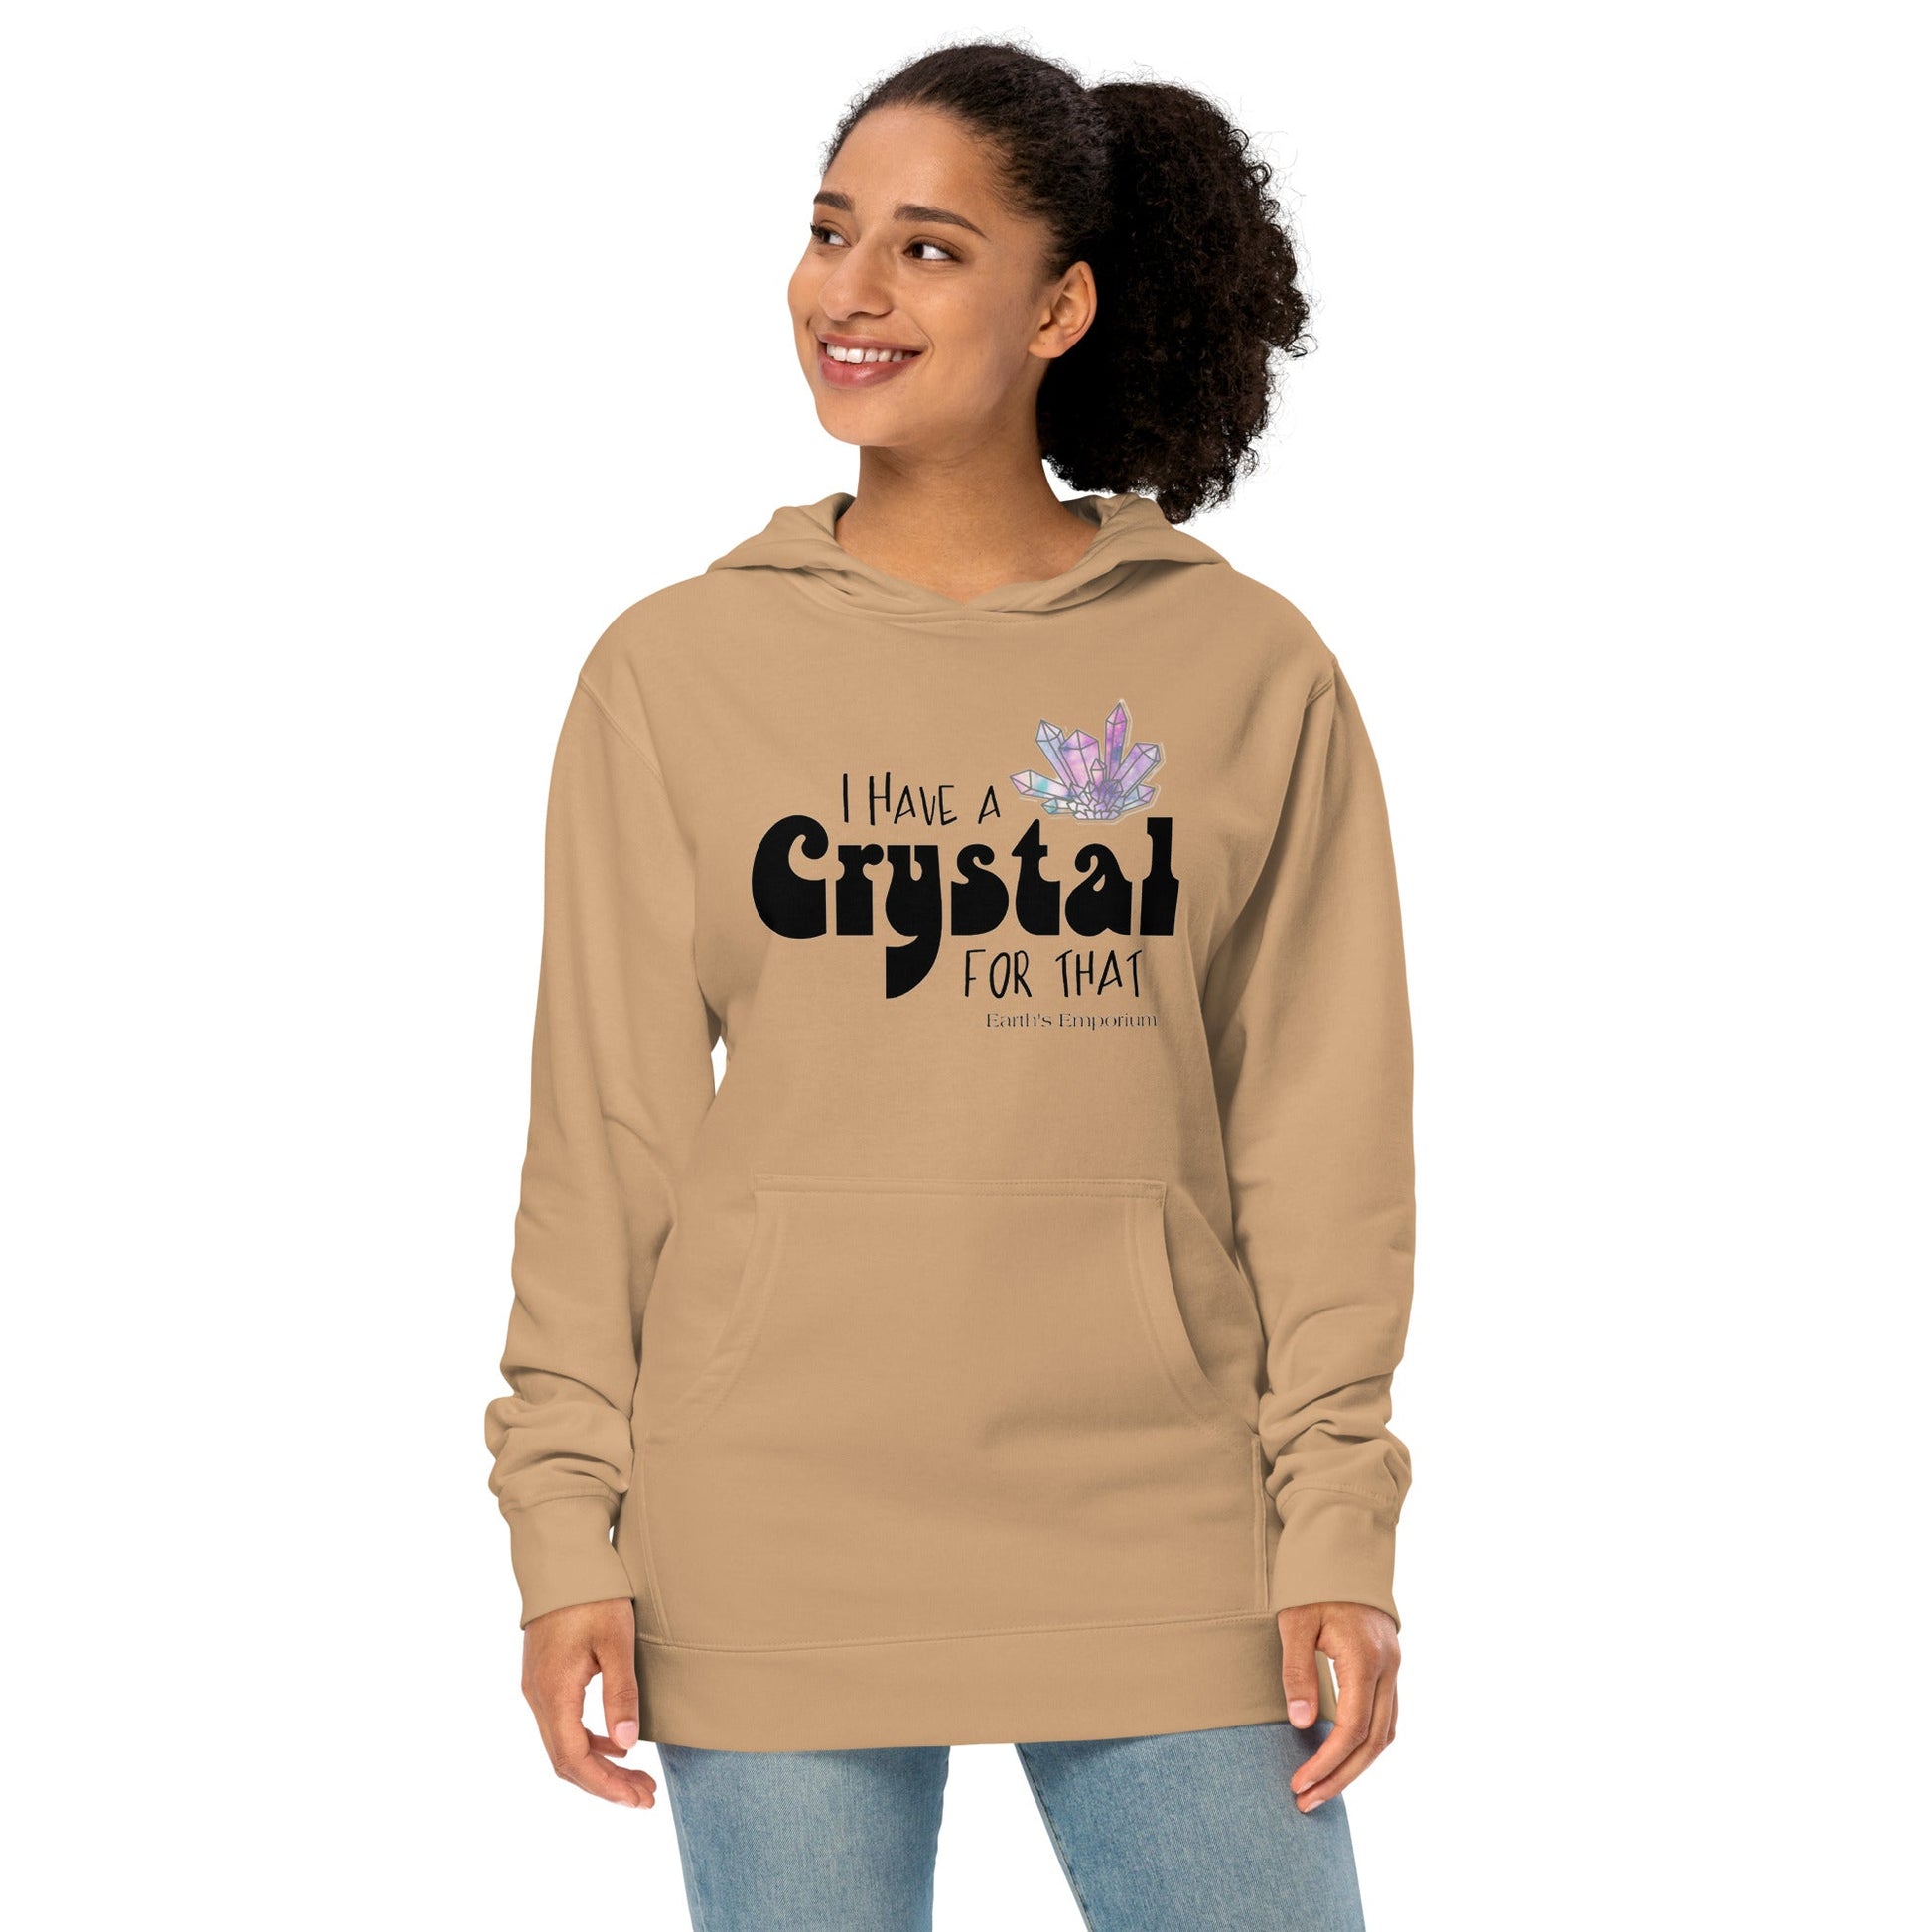 "I have a crystal for that" Unisex midweight hoodie - Earth's Emporium